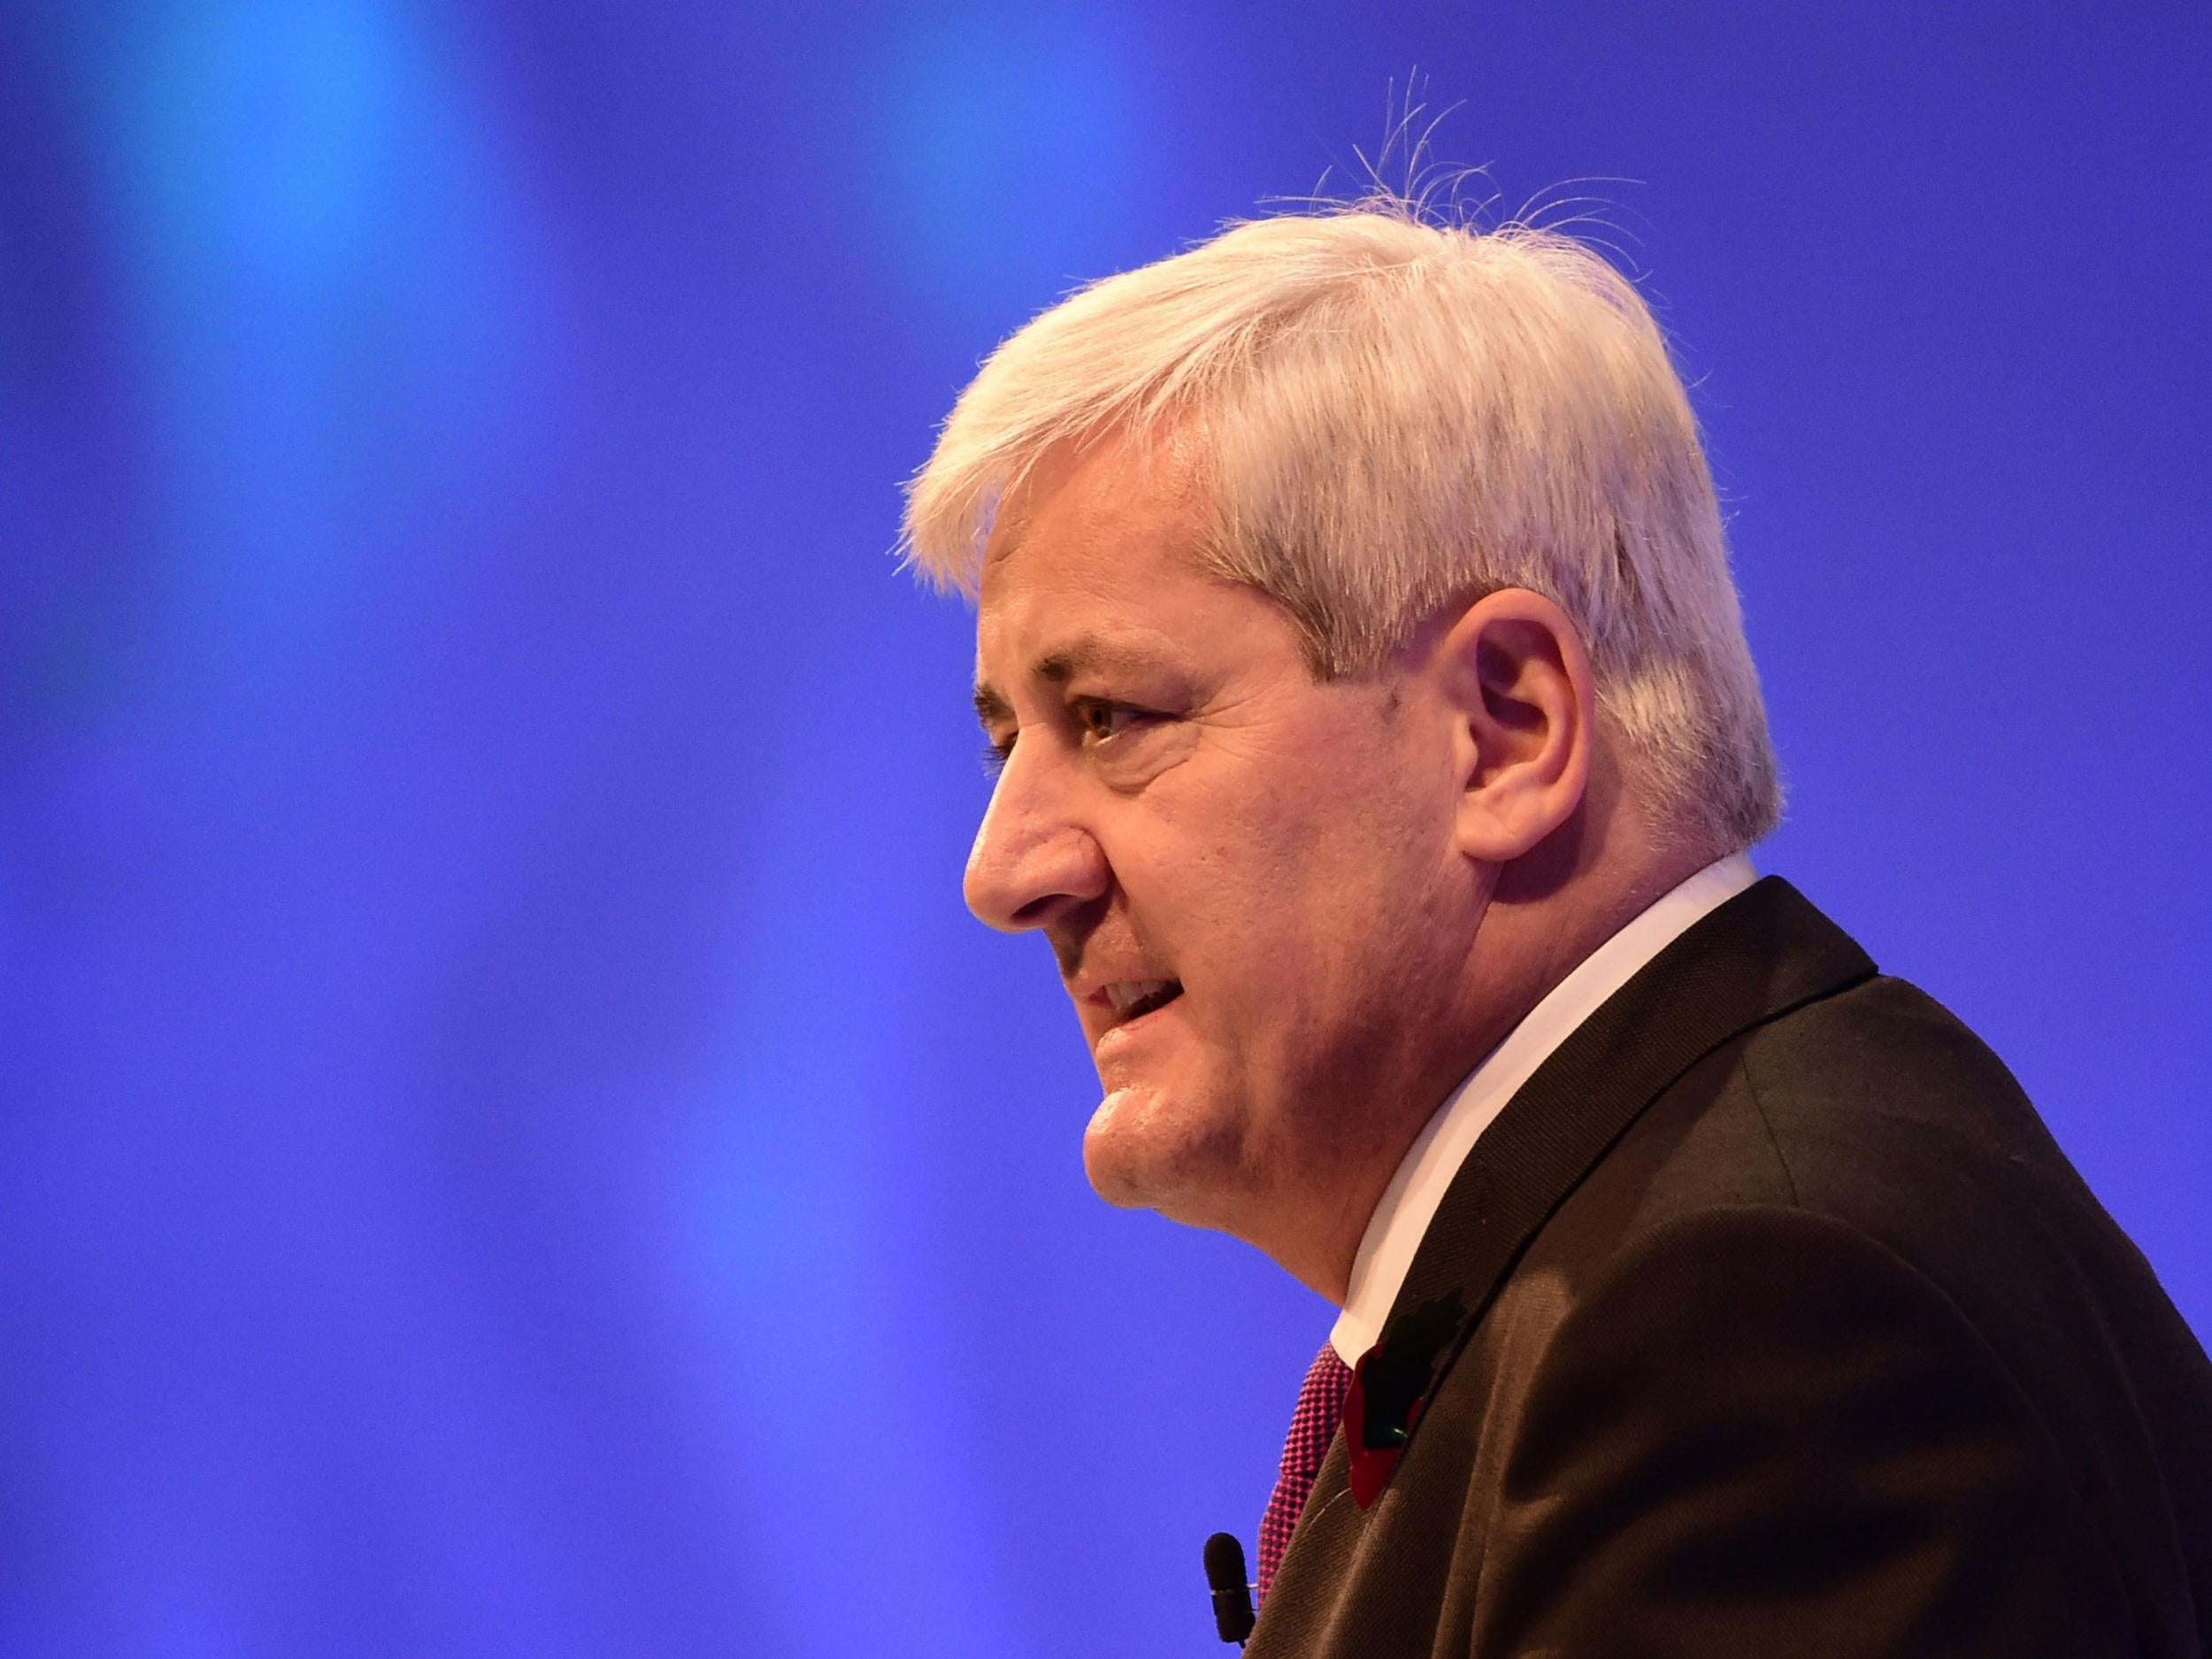 Paul Drechsler, President of the CBI addresses delegates at the annual Confederation of British Industry (CBI) conference in central London, on November 9, 2015.